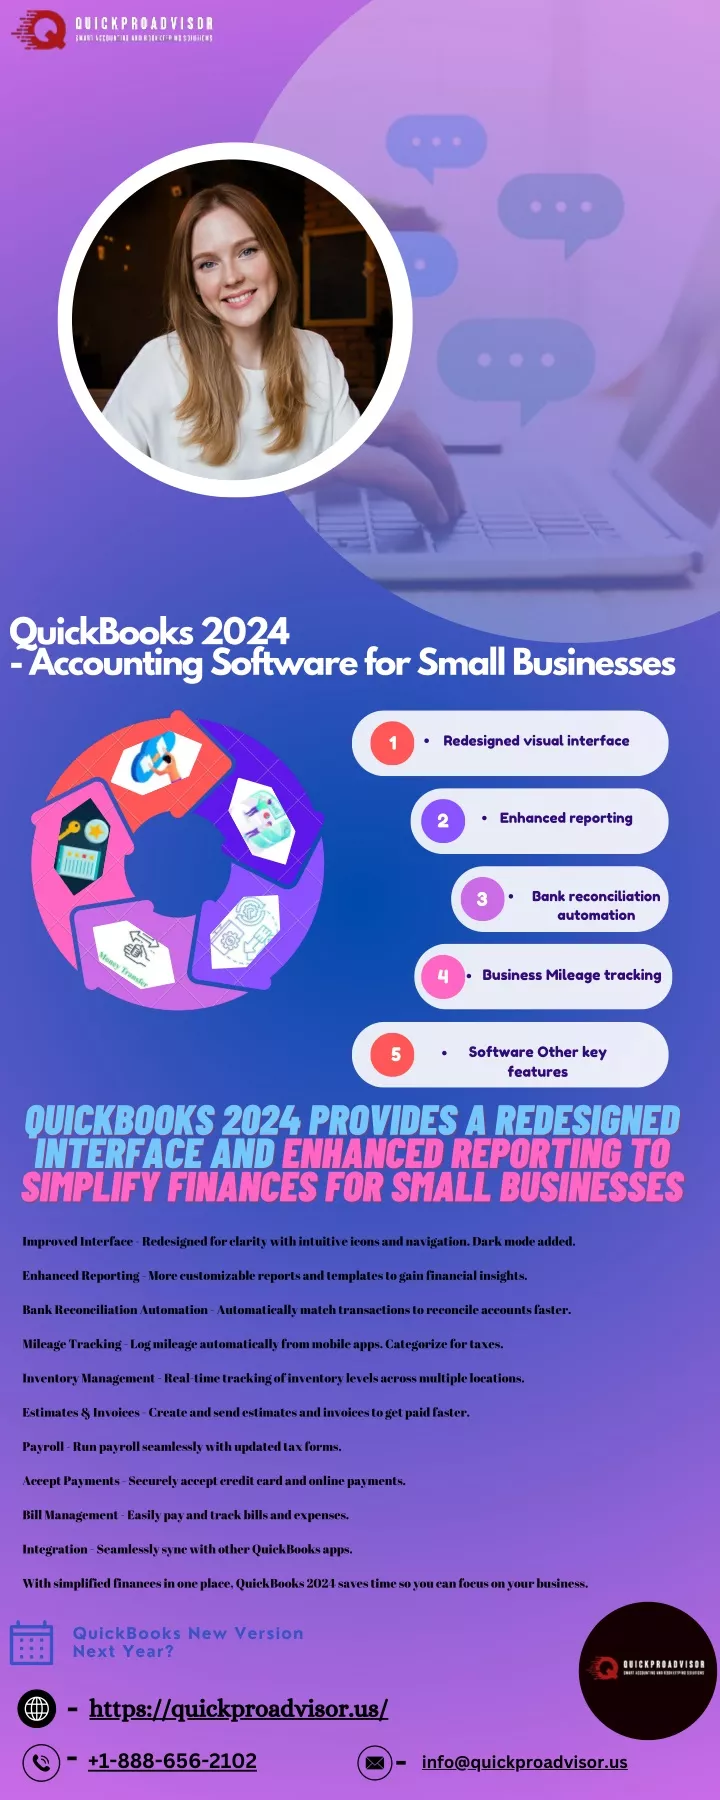 PPT QuickBooks 2024 is The Popular Small Business Accounting Software